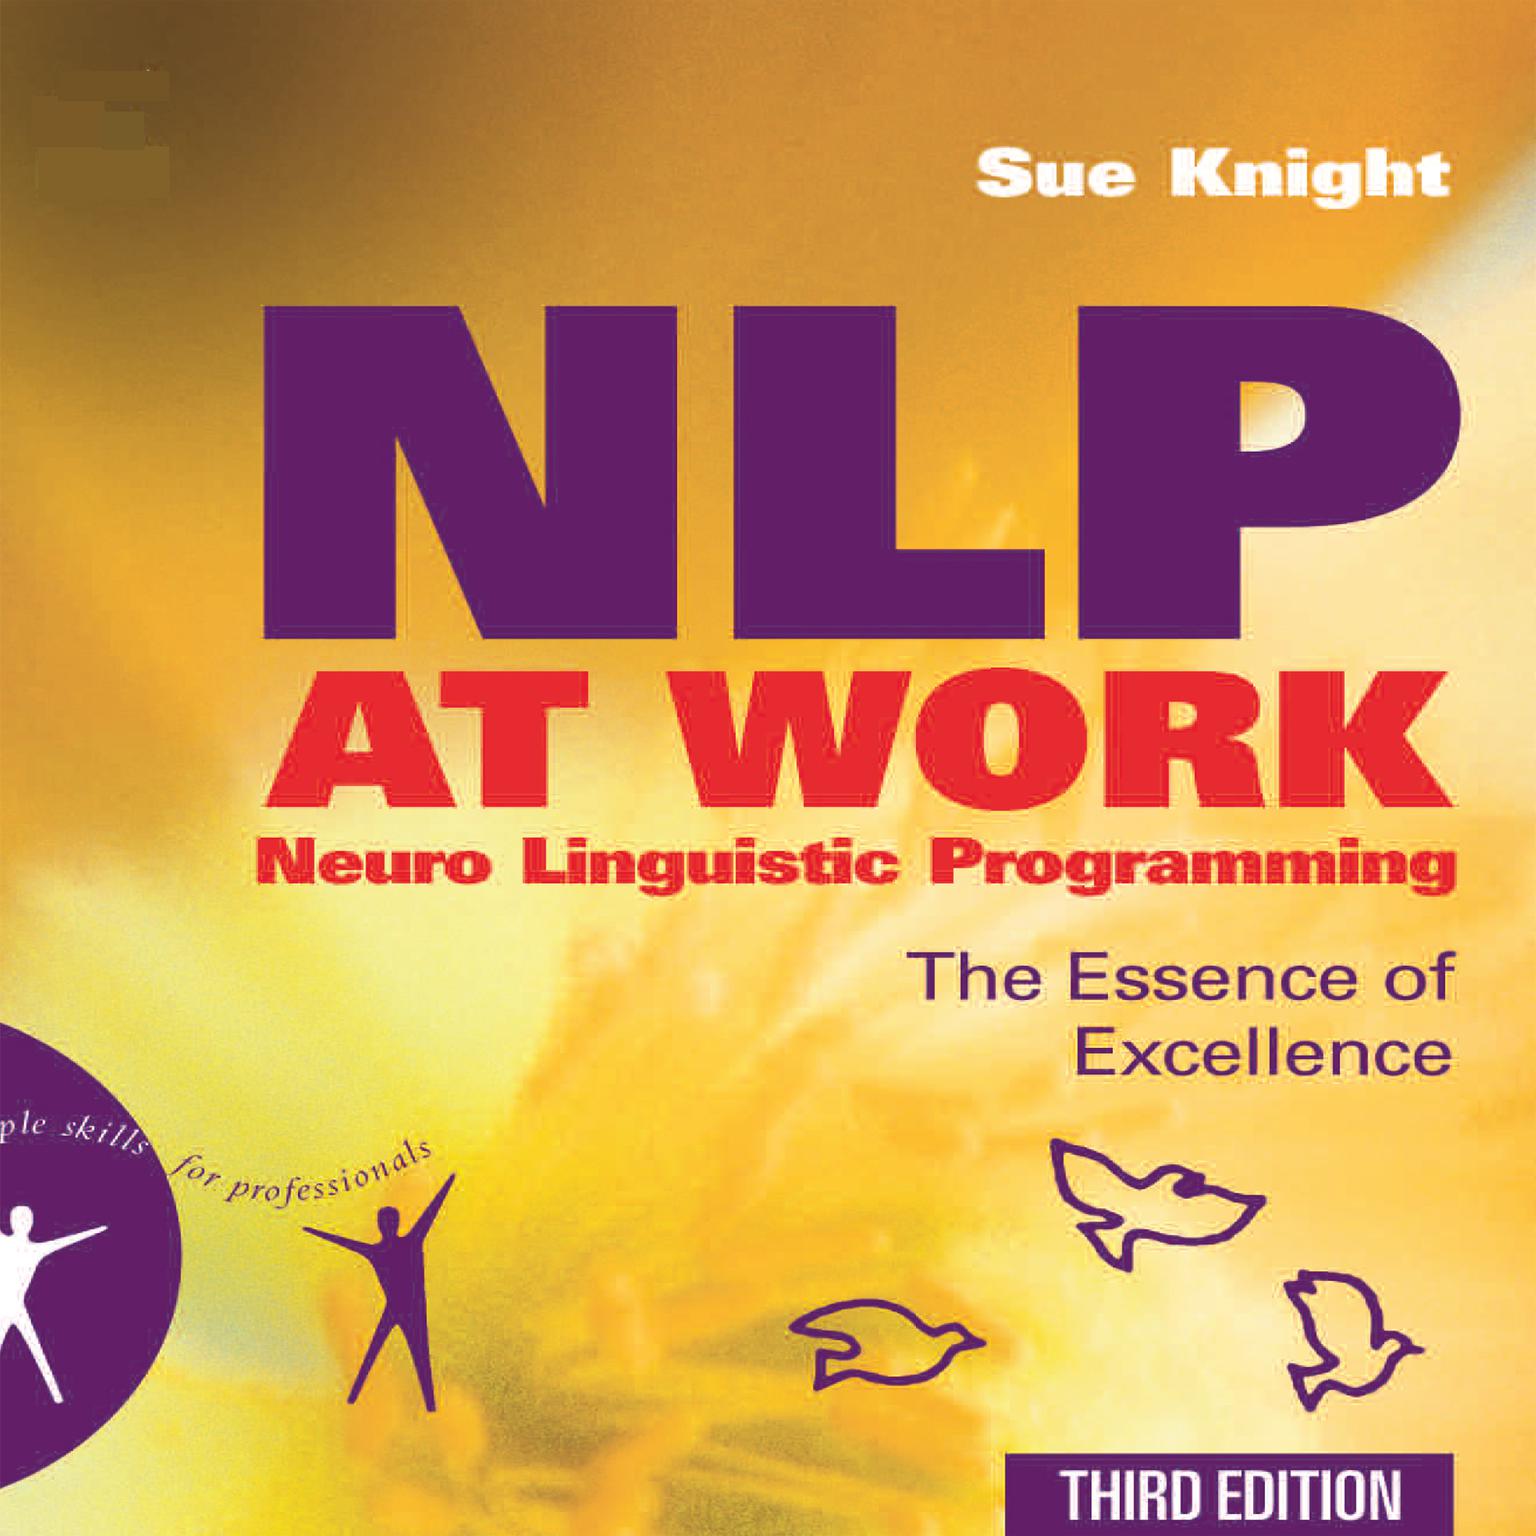 NLP at Work: The Essence of Excellence, 3rd Edition (People Skills for Professionals) Audiobook, by Sue Knight